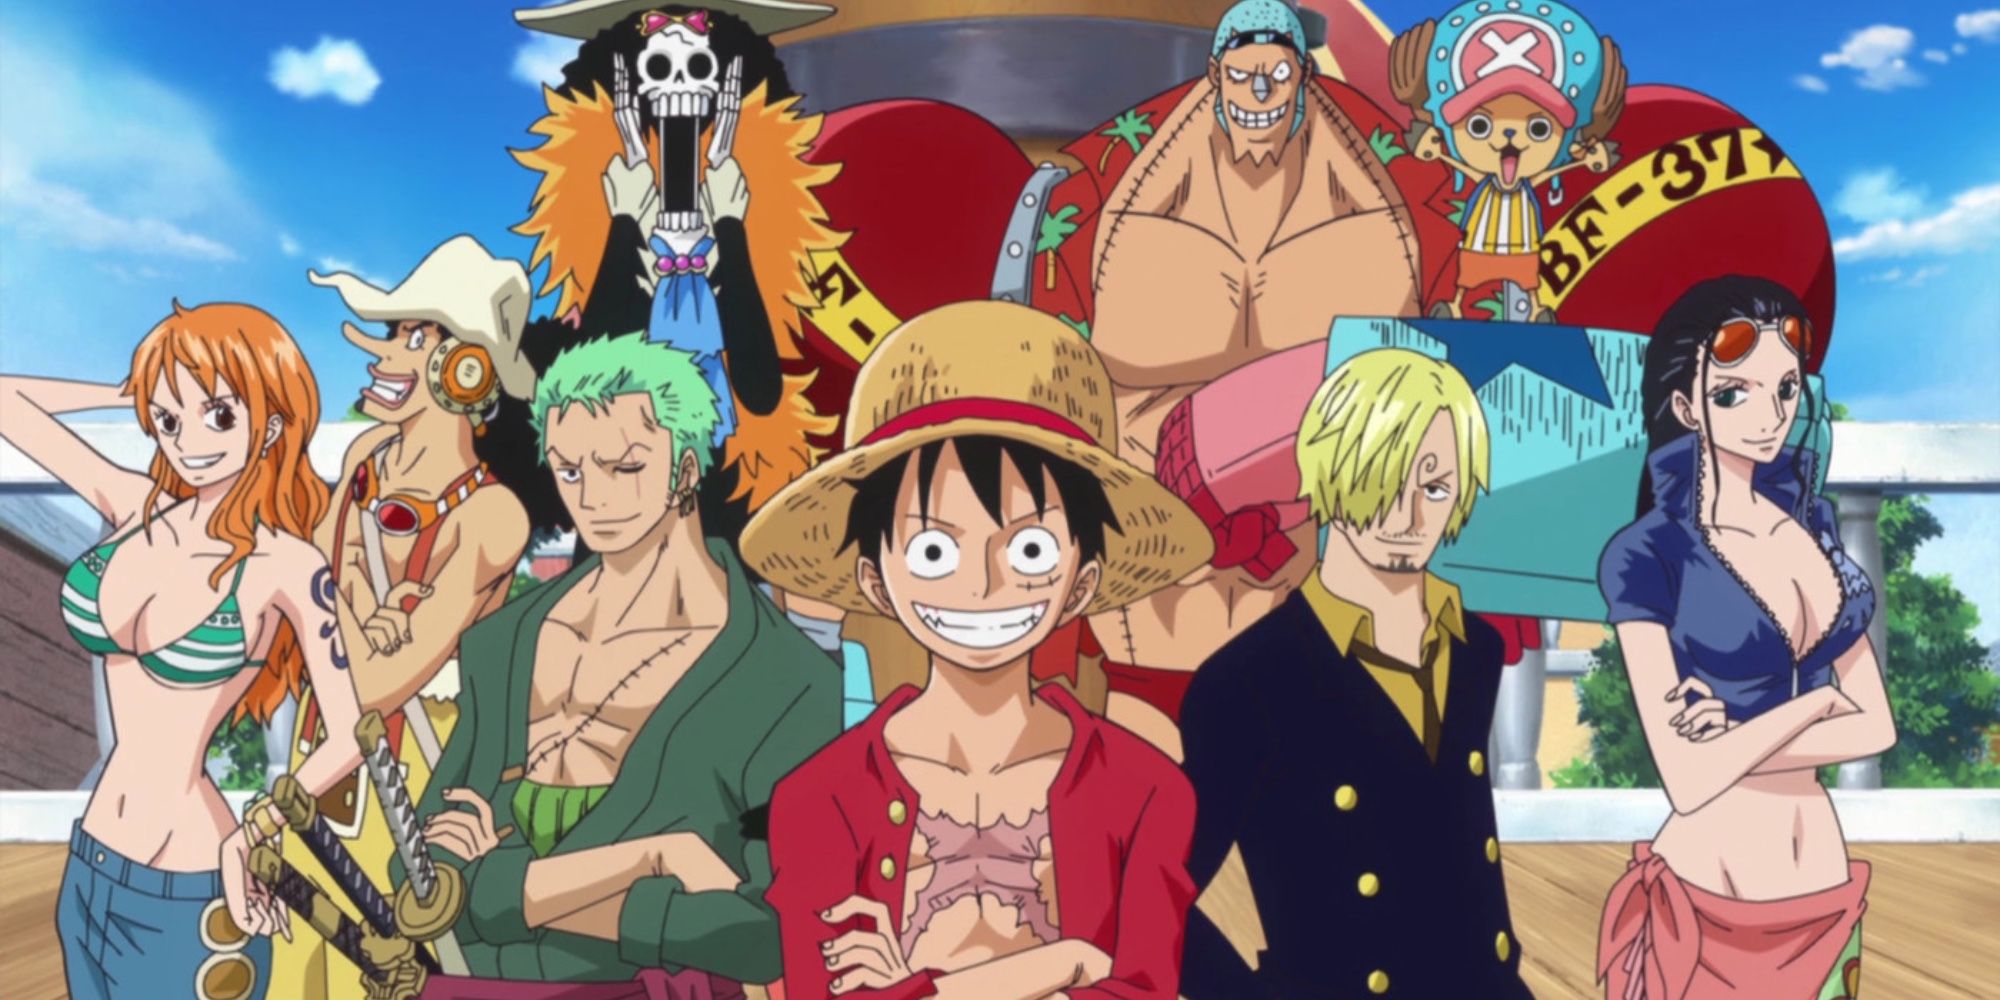 One Piece Art Piece Combines All Volumes in 21,450-Page Book - Siliconera